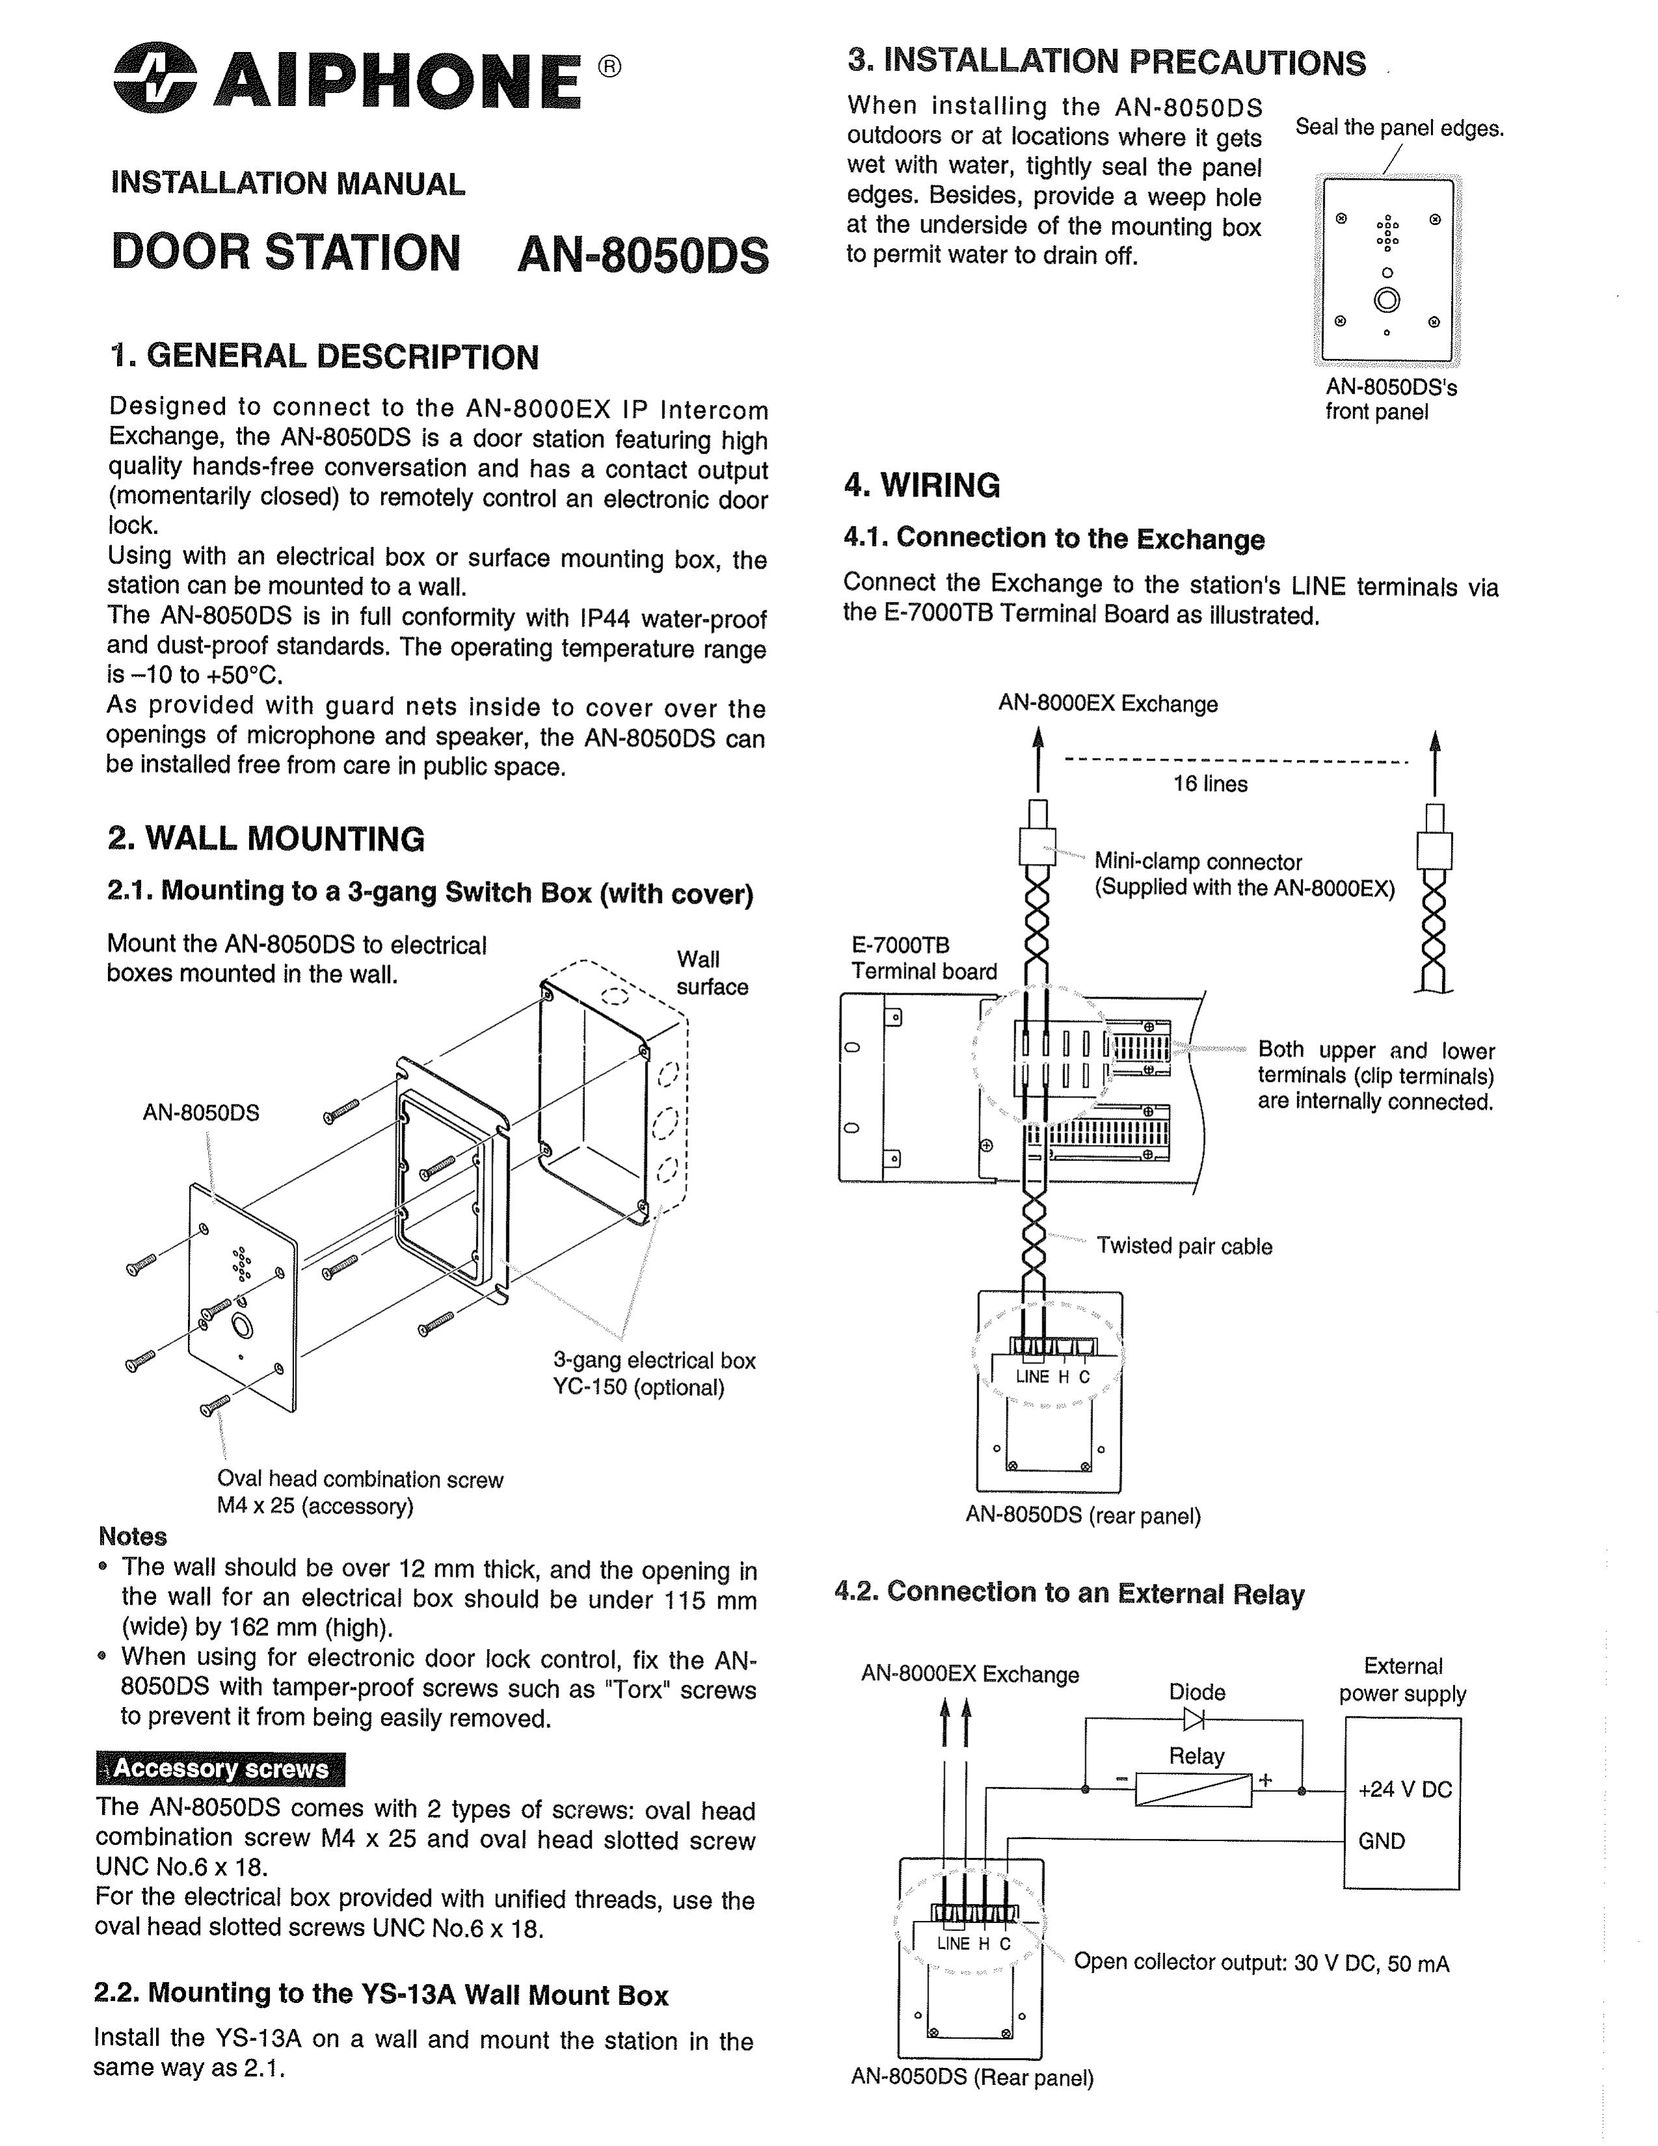 Aiphone AN-8050DS Intercom System User Manual